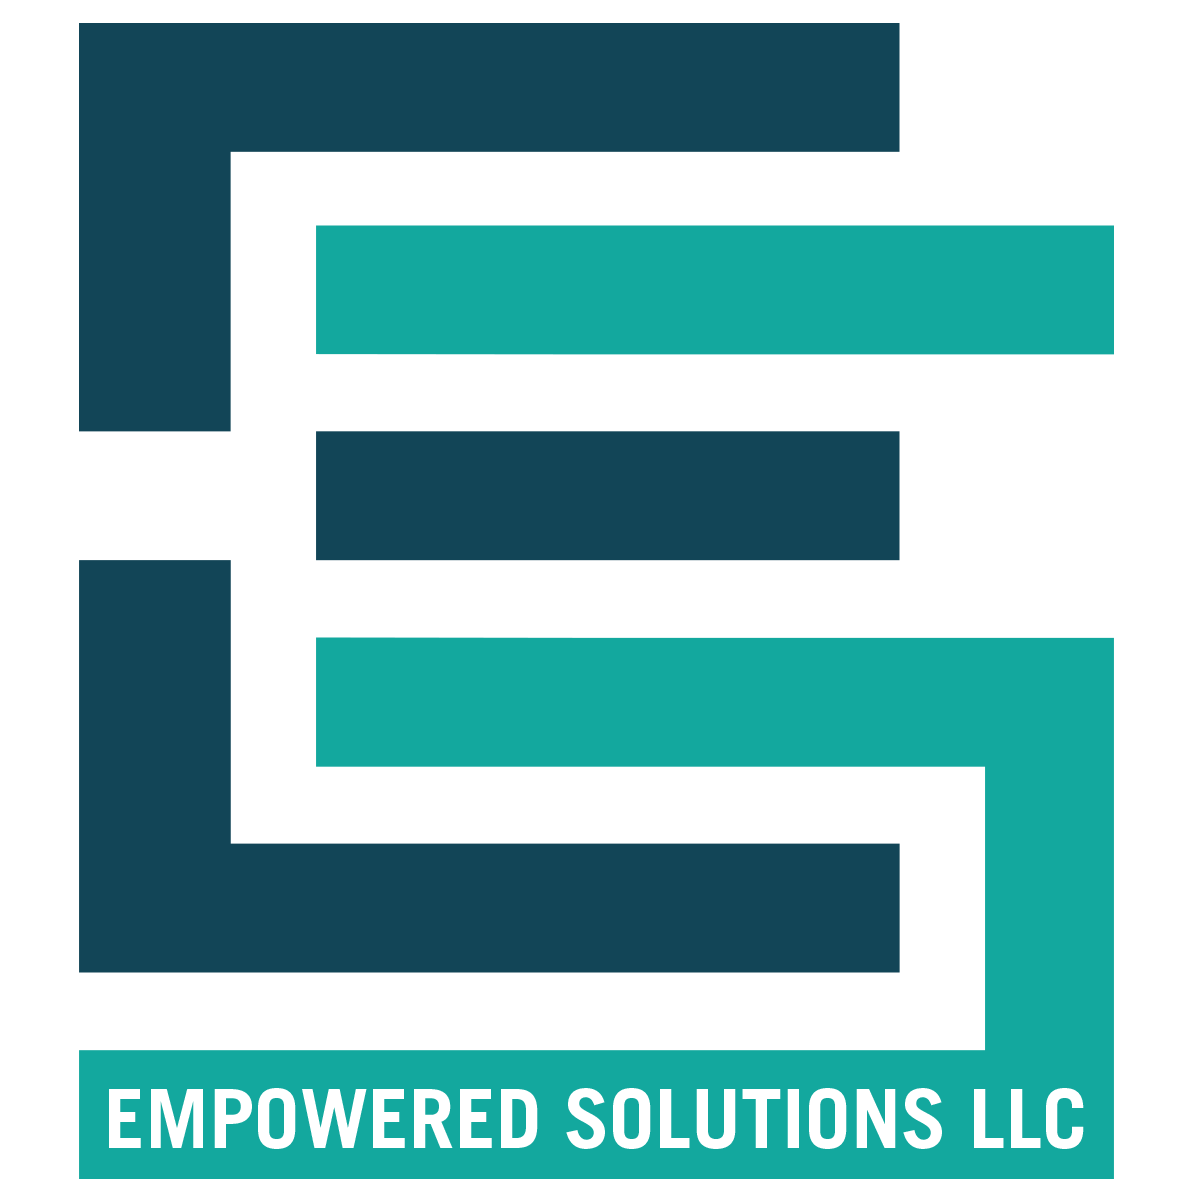 Empowered Solutions LLC